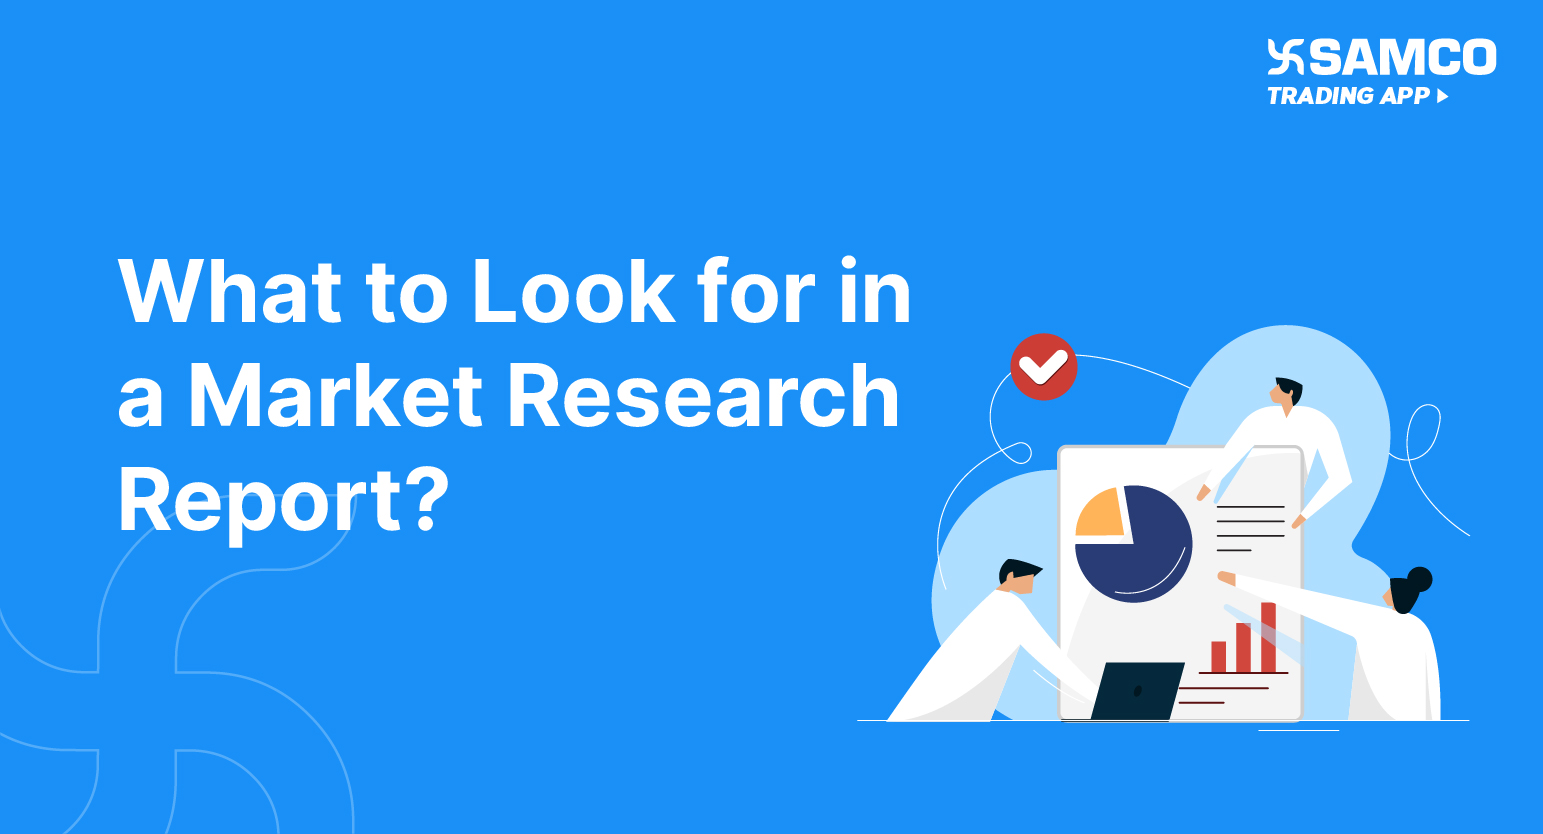 What to Look for in a Market Research Report?